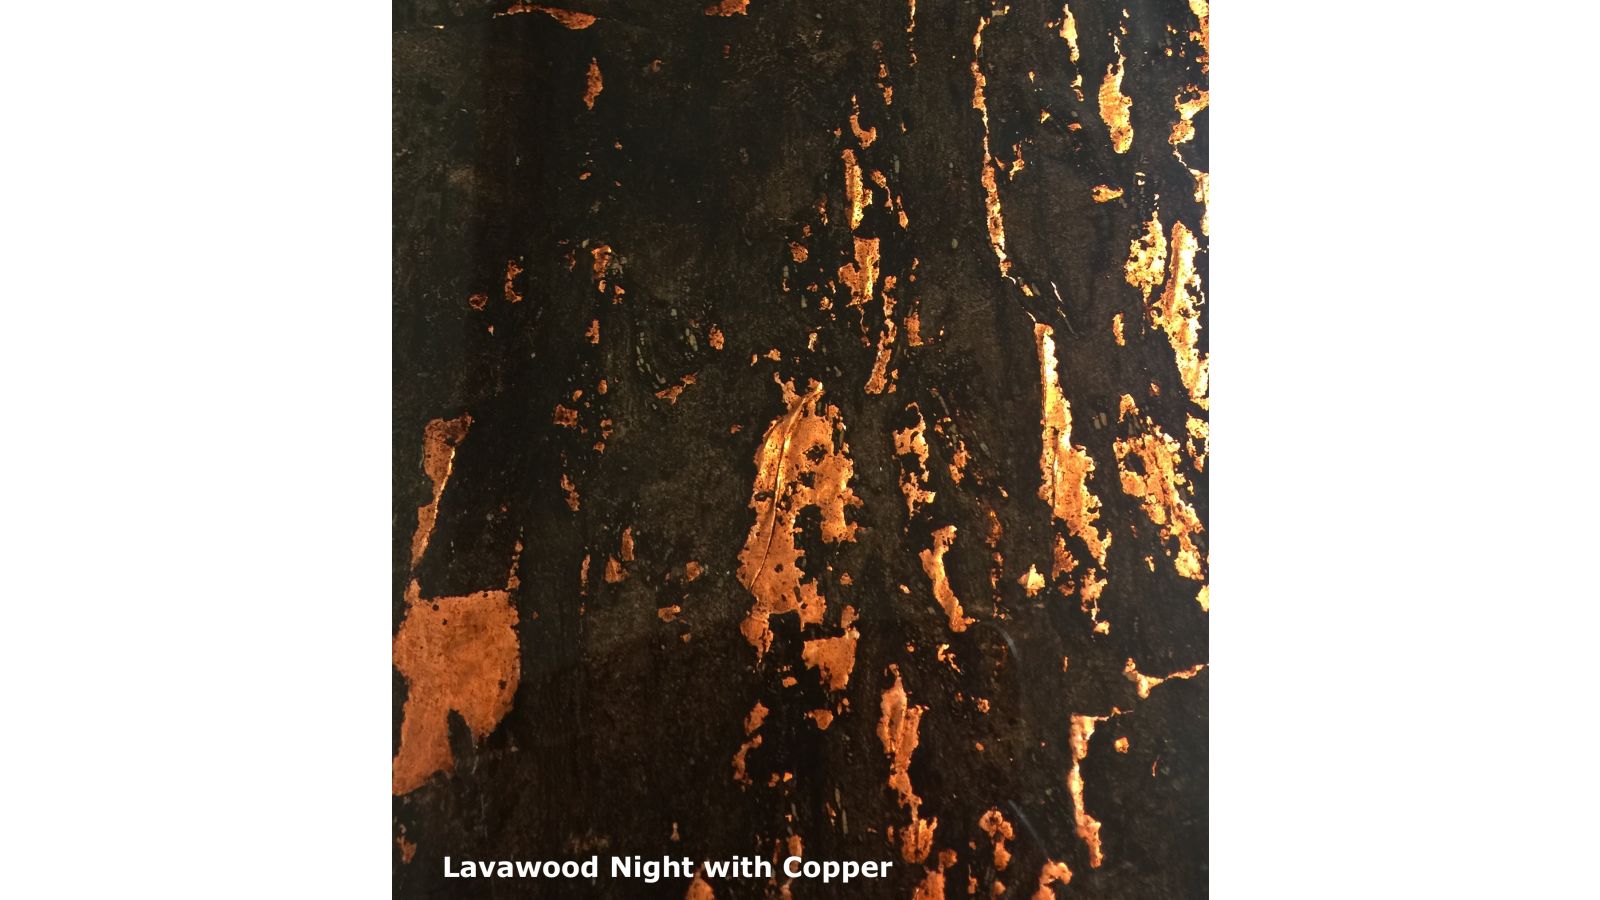 Lavawood Night with Copper